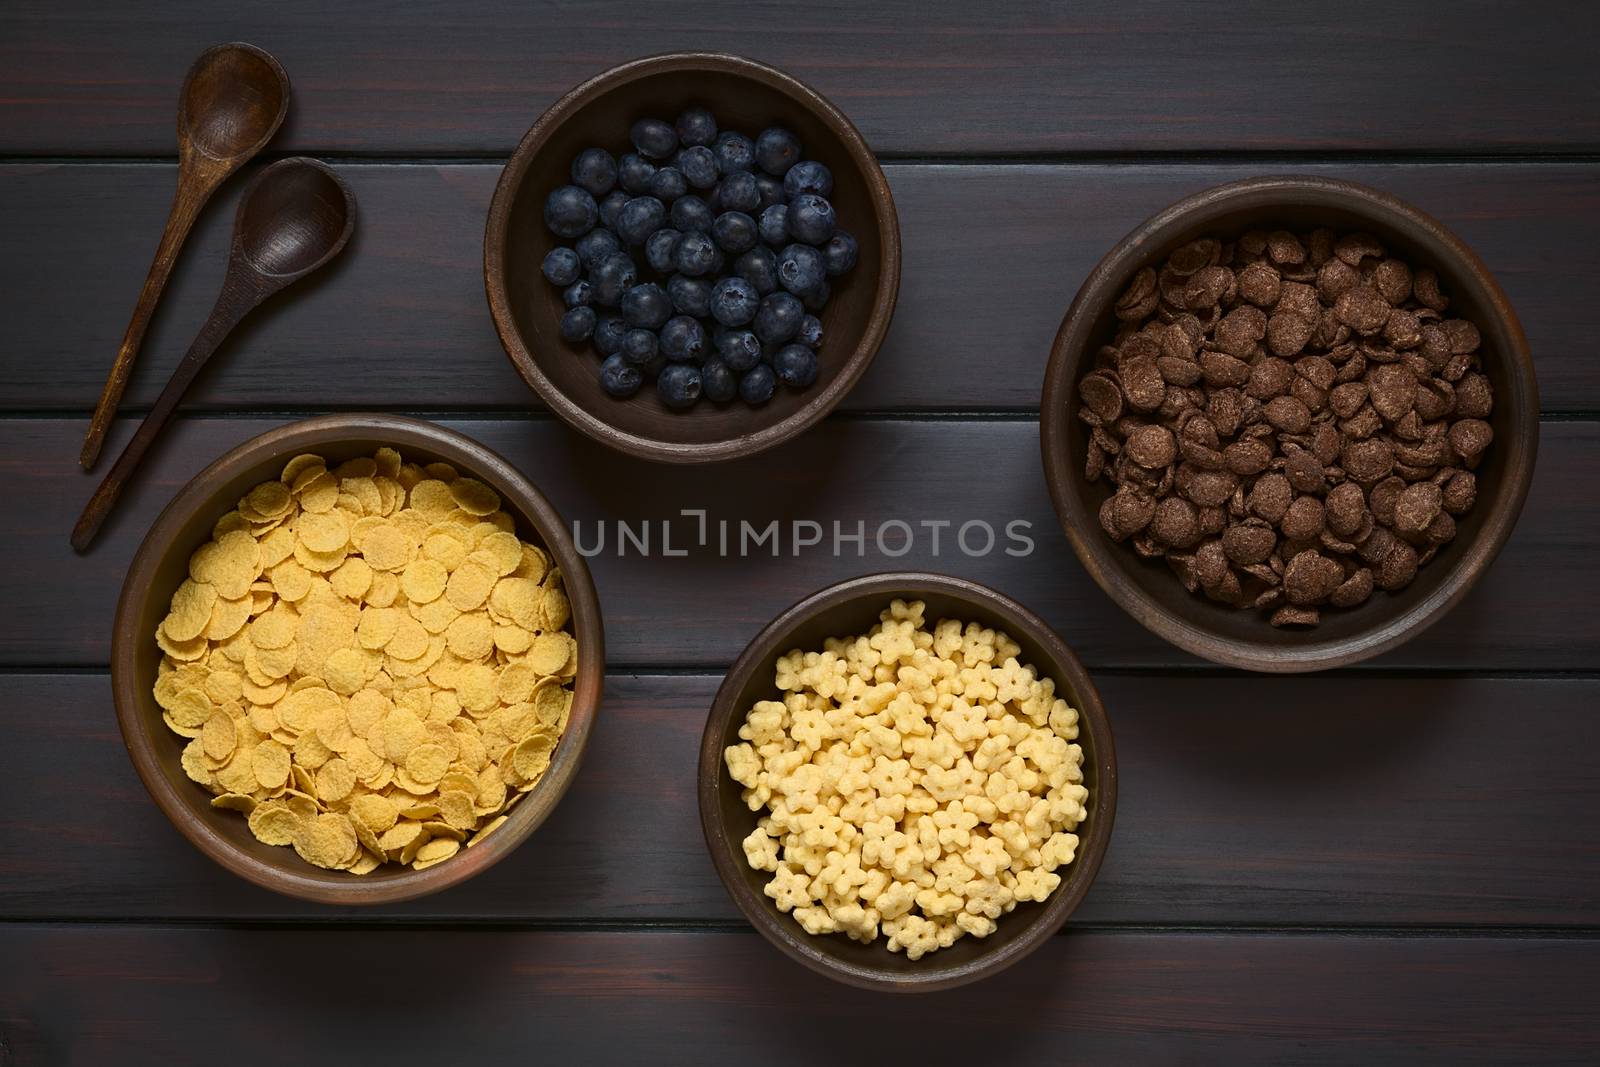 Crispy chocolate and simple corn flakes, and honey flavored breakfast cereal in rustic bowls with fresh blueberries and wooden spoons on the side, photographed overhead on dark wood with natural light